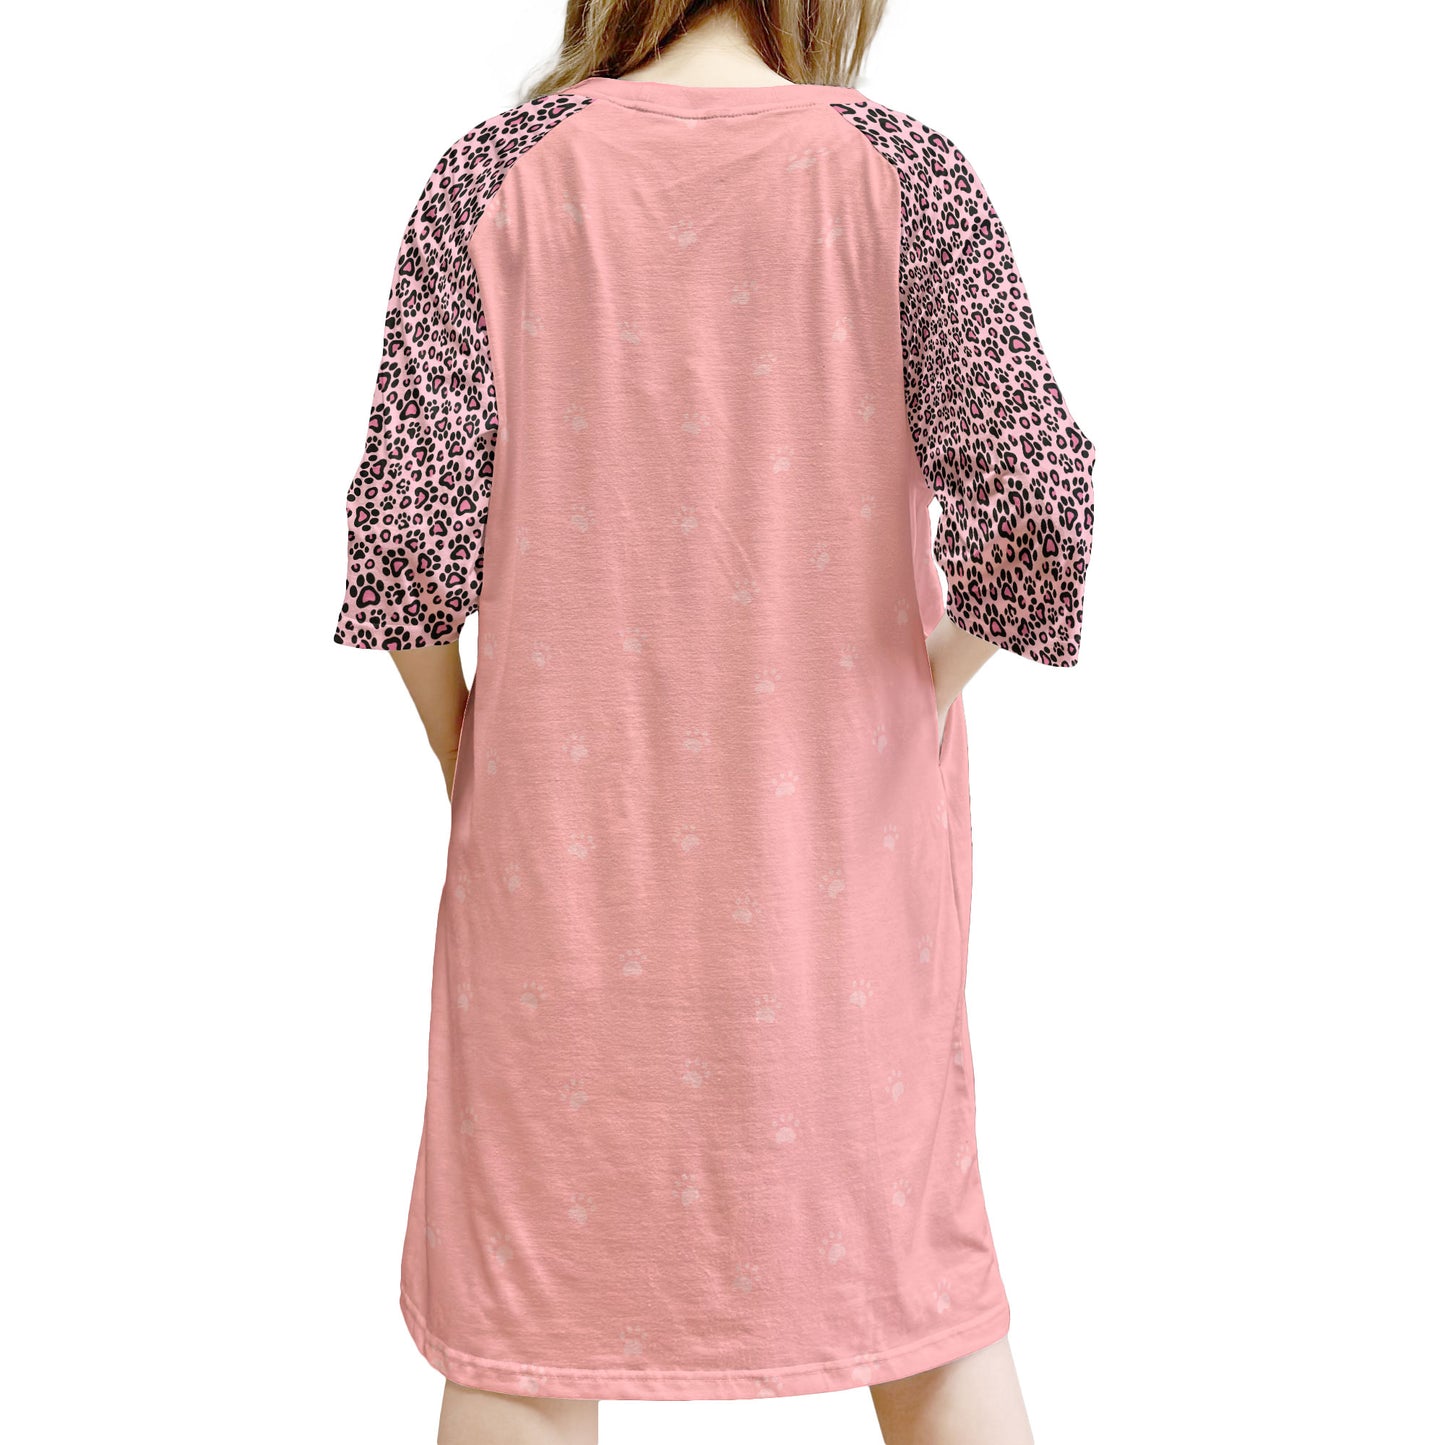 The Snuggle Is Real - Personalized 3/4 Sleeve Dress